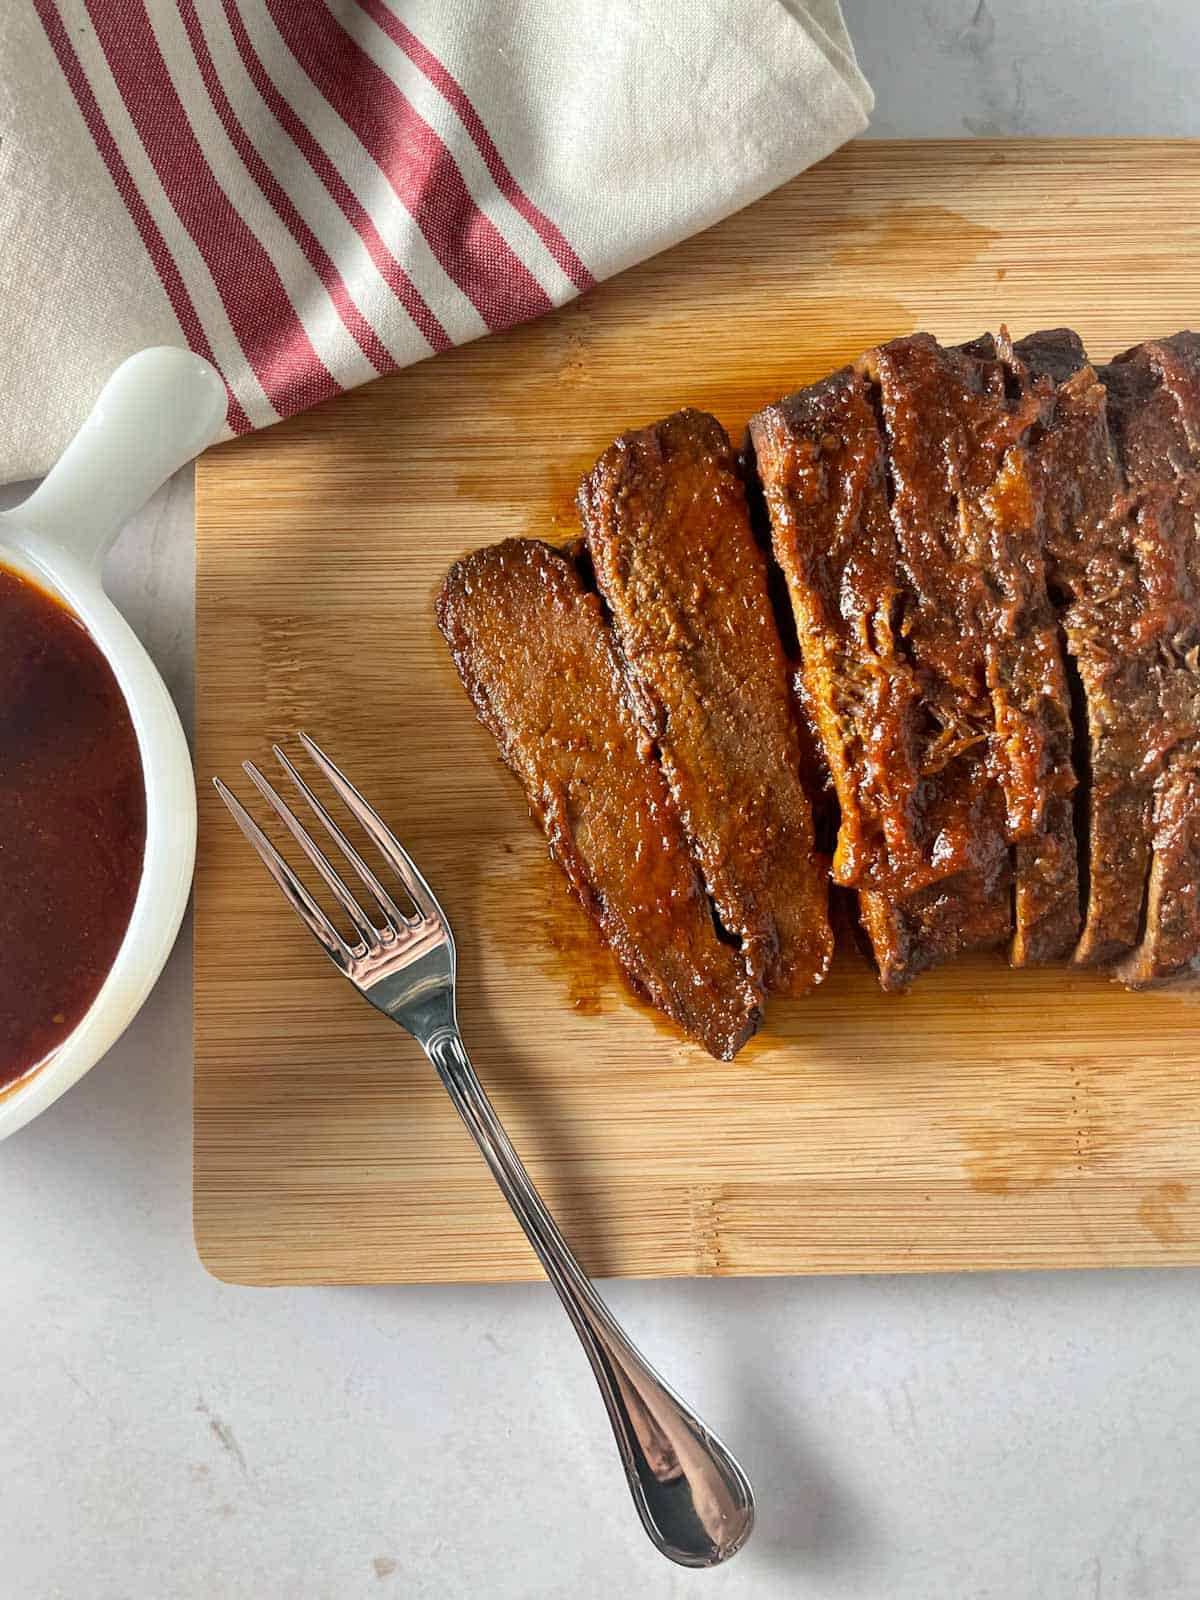 Slow cooked BBQ beef brisket sliced on a cutting board.